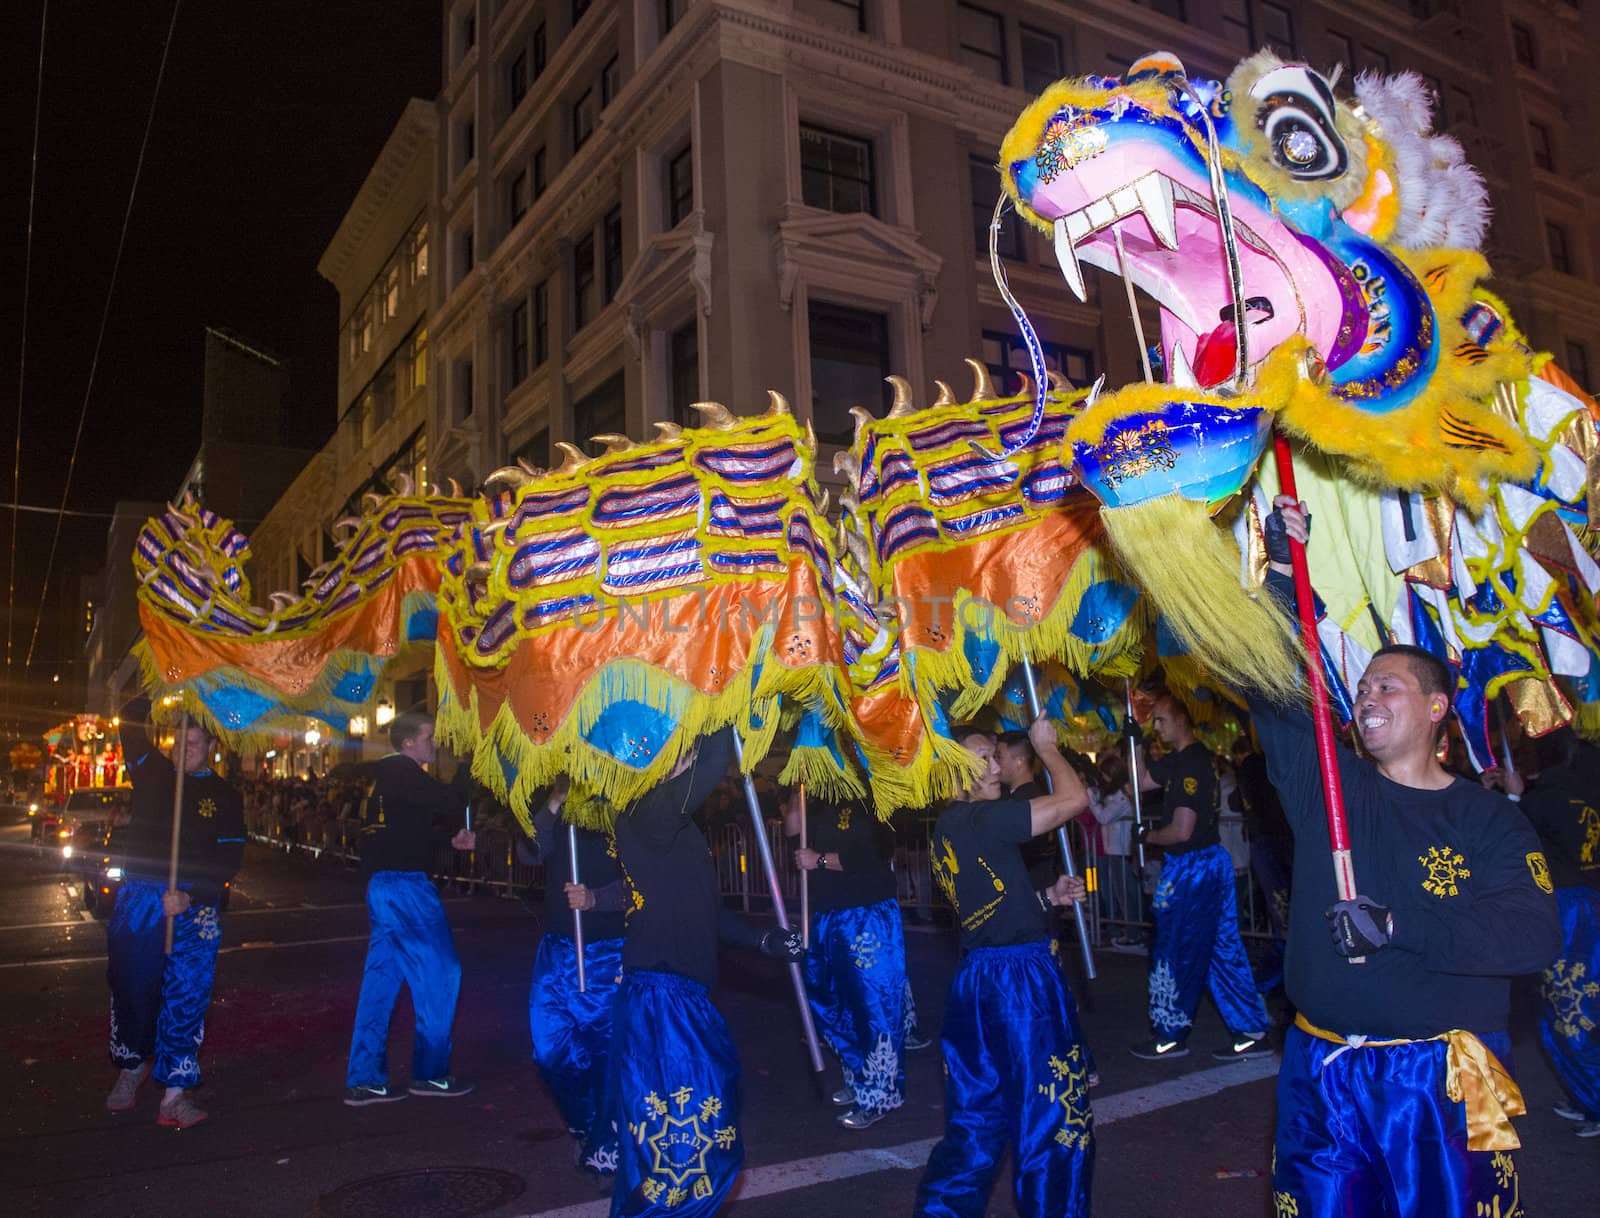 SAN FRANCISCO - FEB 15 : An unidentified participants in a Dragon dance at the Chinese New Year Parade in San Francisco , California on February 15 2014 , It is the largest Asian event in North America 